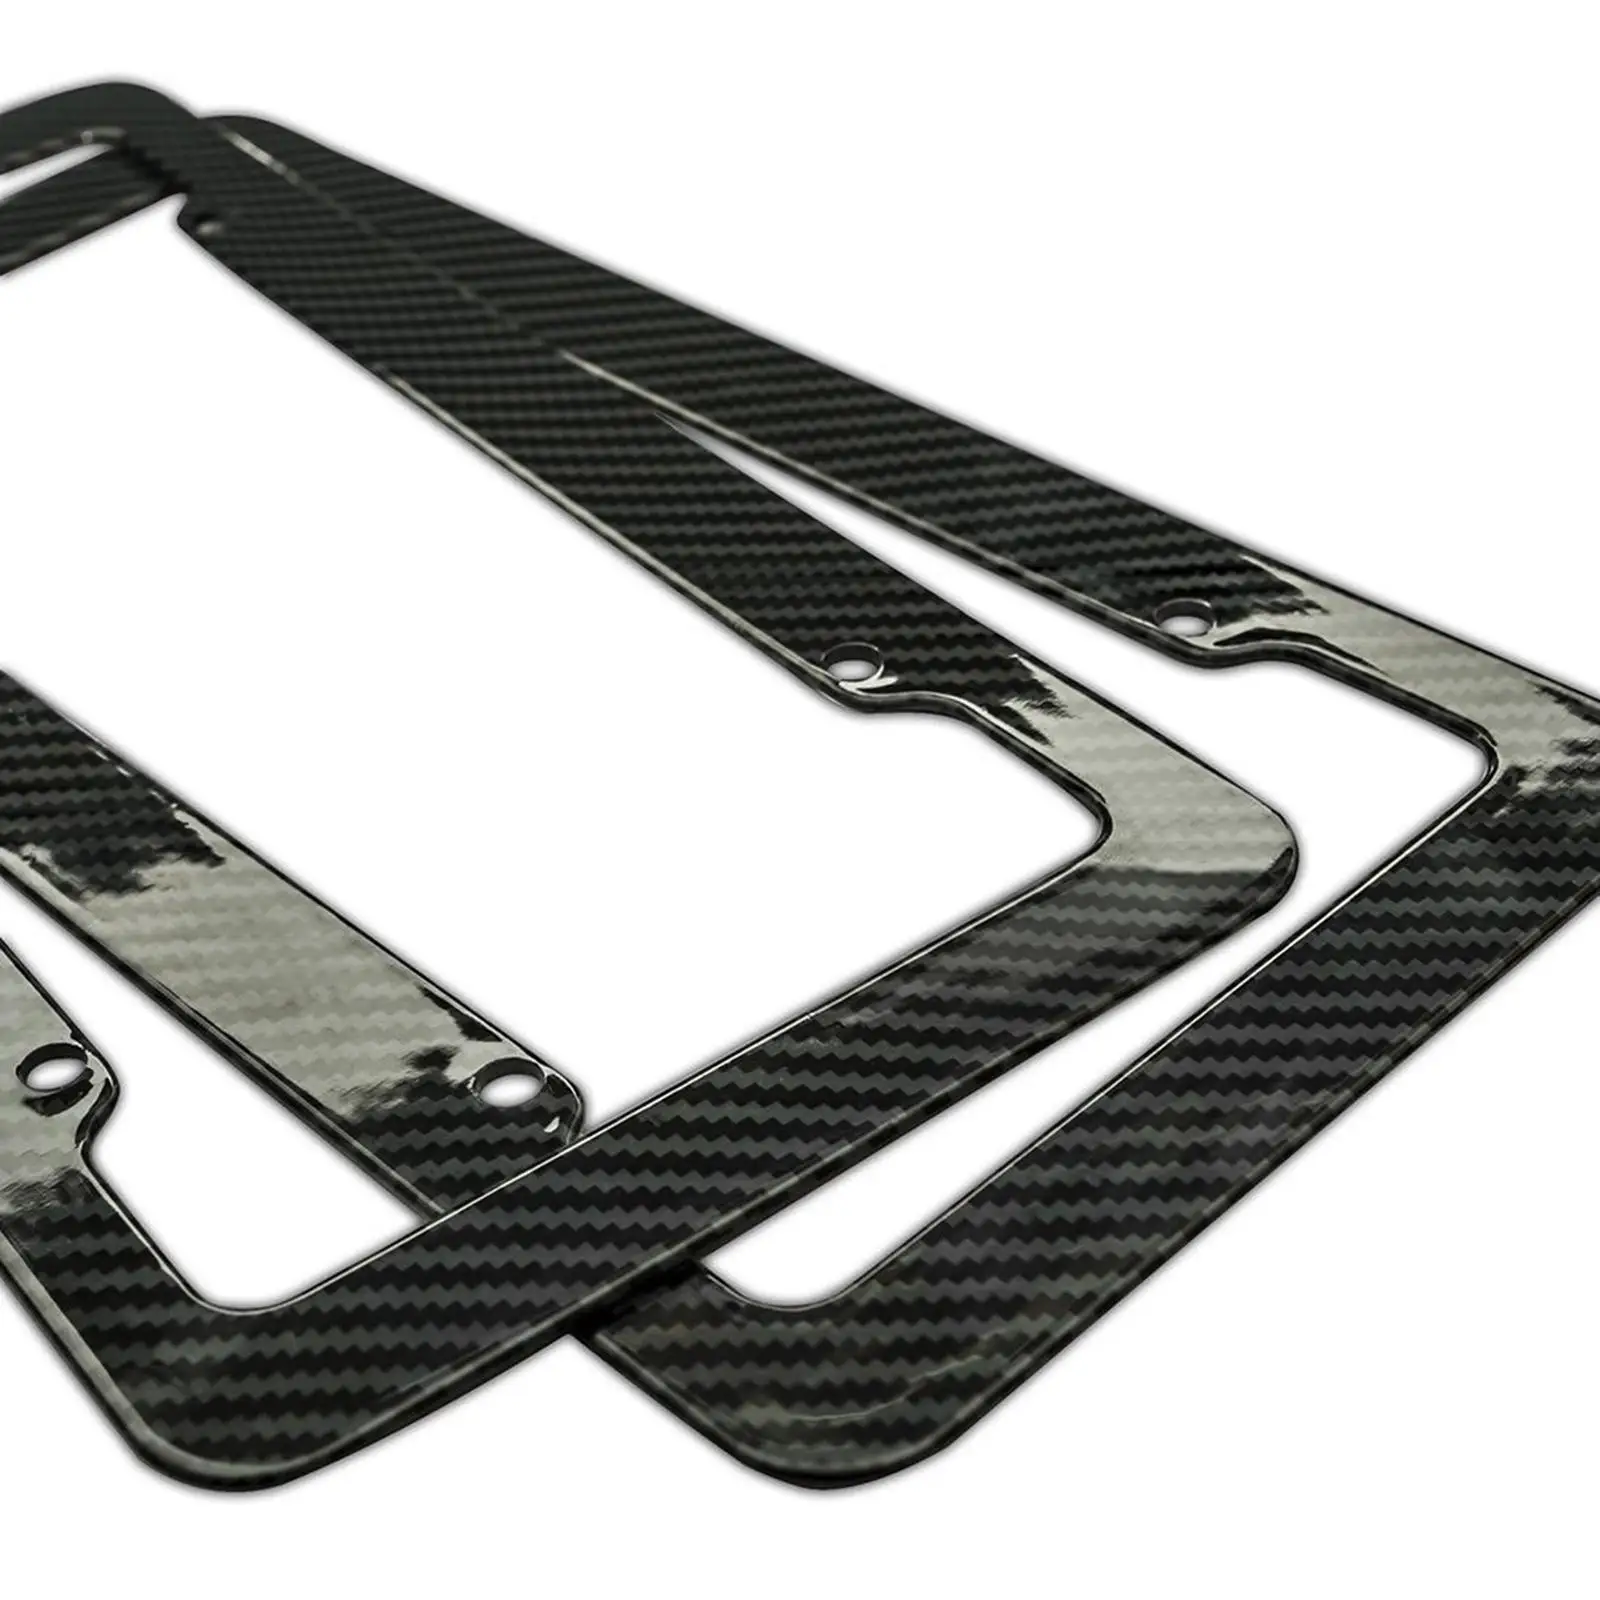 2x Carbon Fiber Style Frames Plate Covers for US Accessories Durable